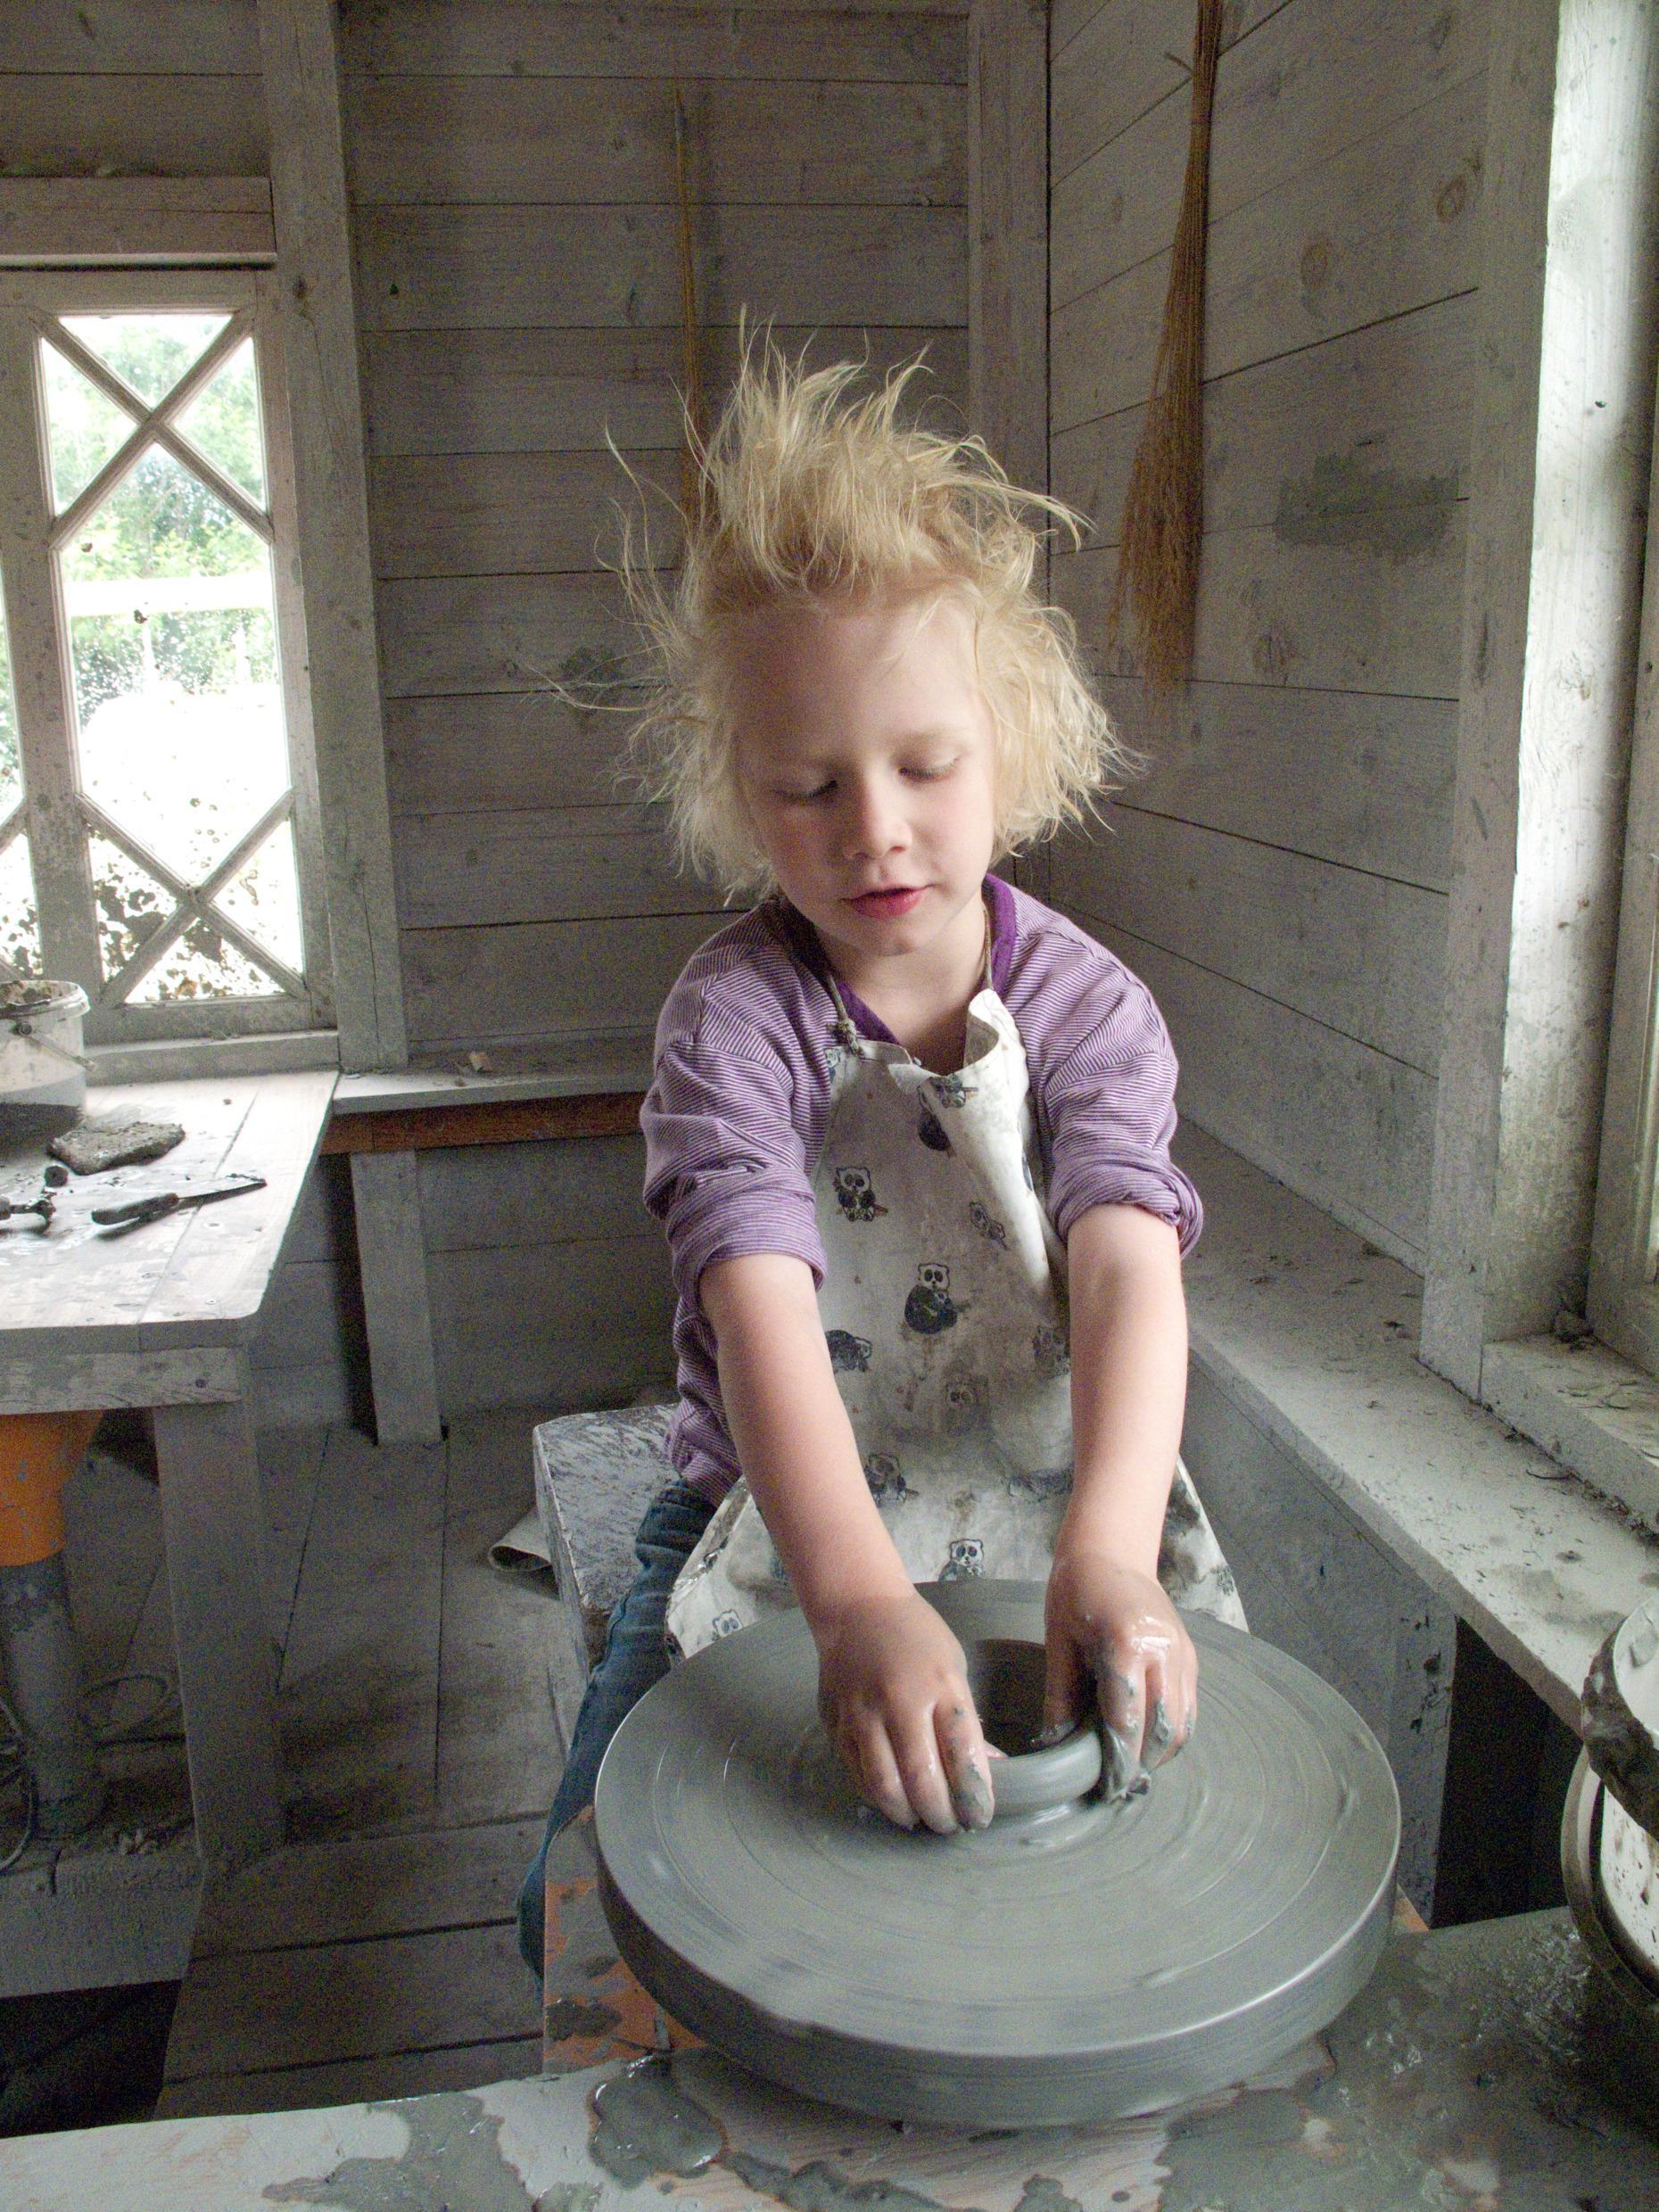 A child wearing an apron is making pottery.